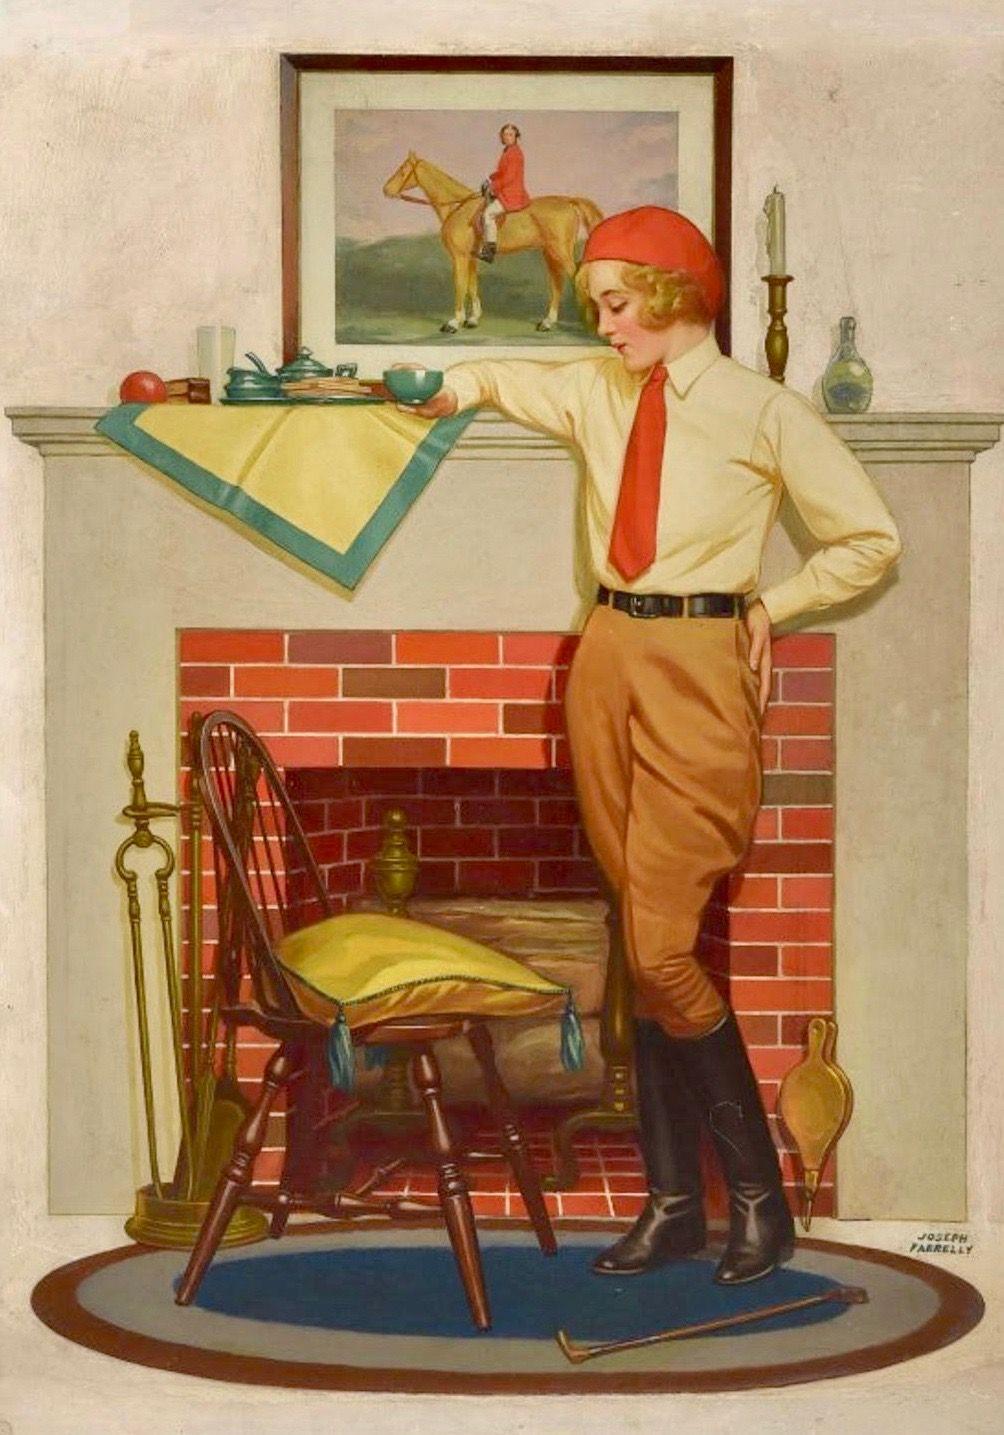 Joseph Farrely Figurative Painting - Maclean's Magazine Cover, 1930